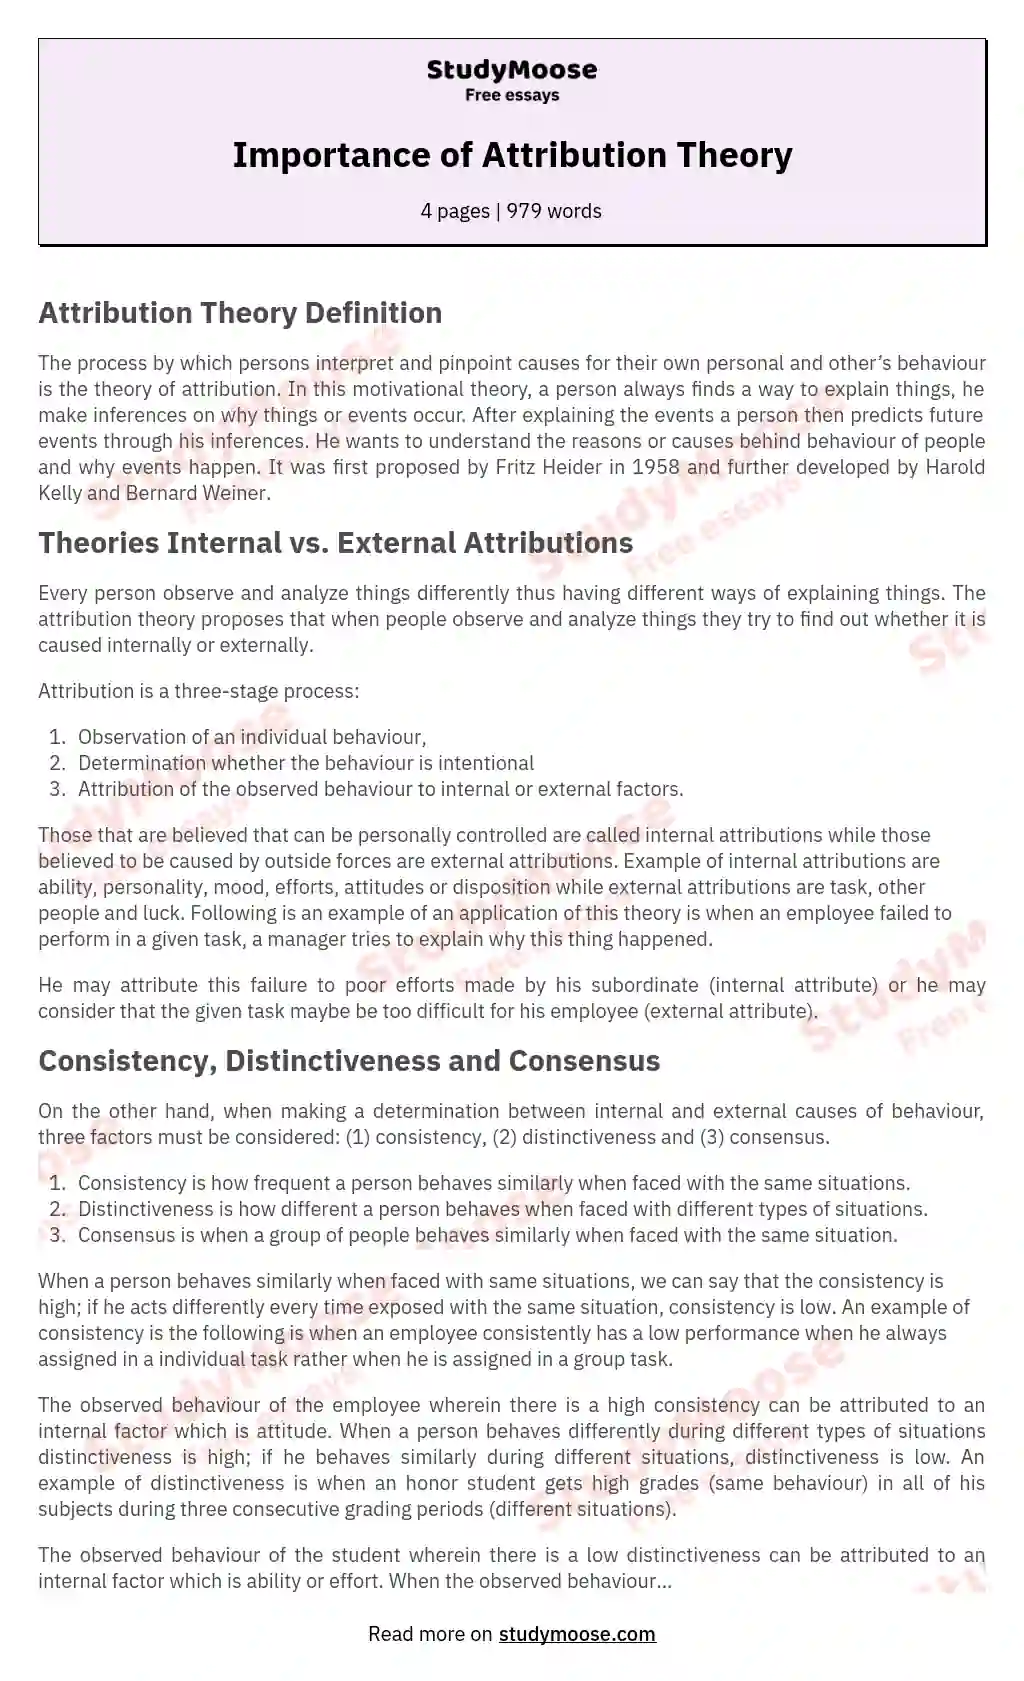 Importance of Attribution Theory essay